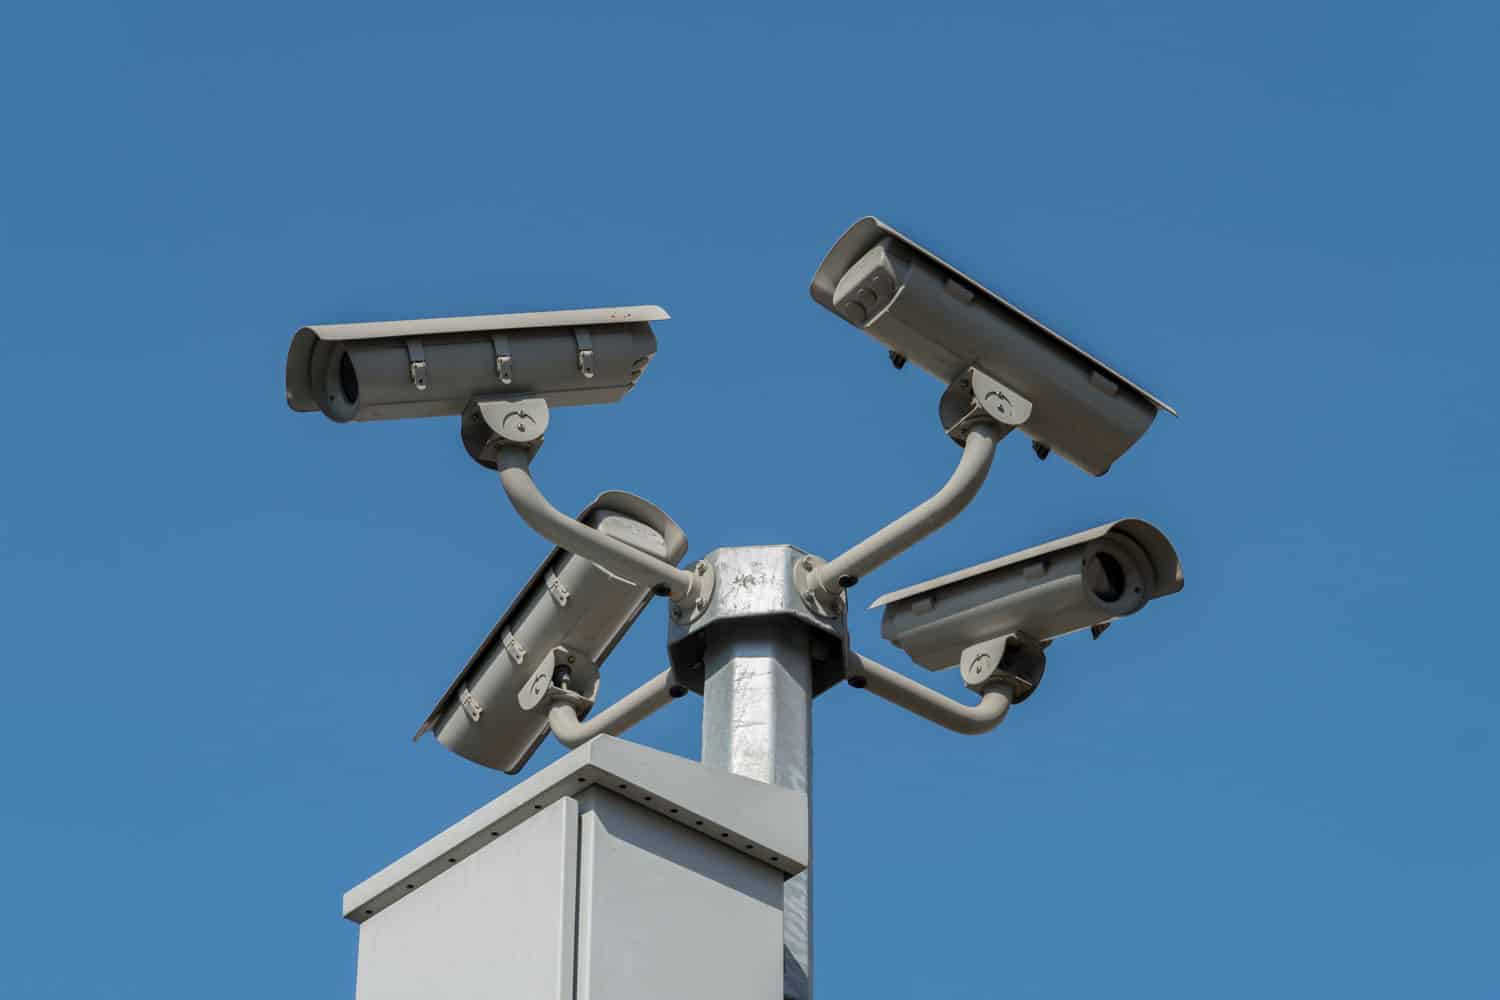 How Many Cameras Are Needed for Your Industrial Security System Design?